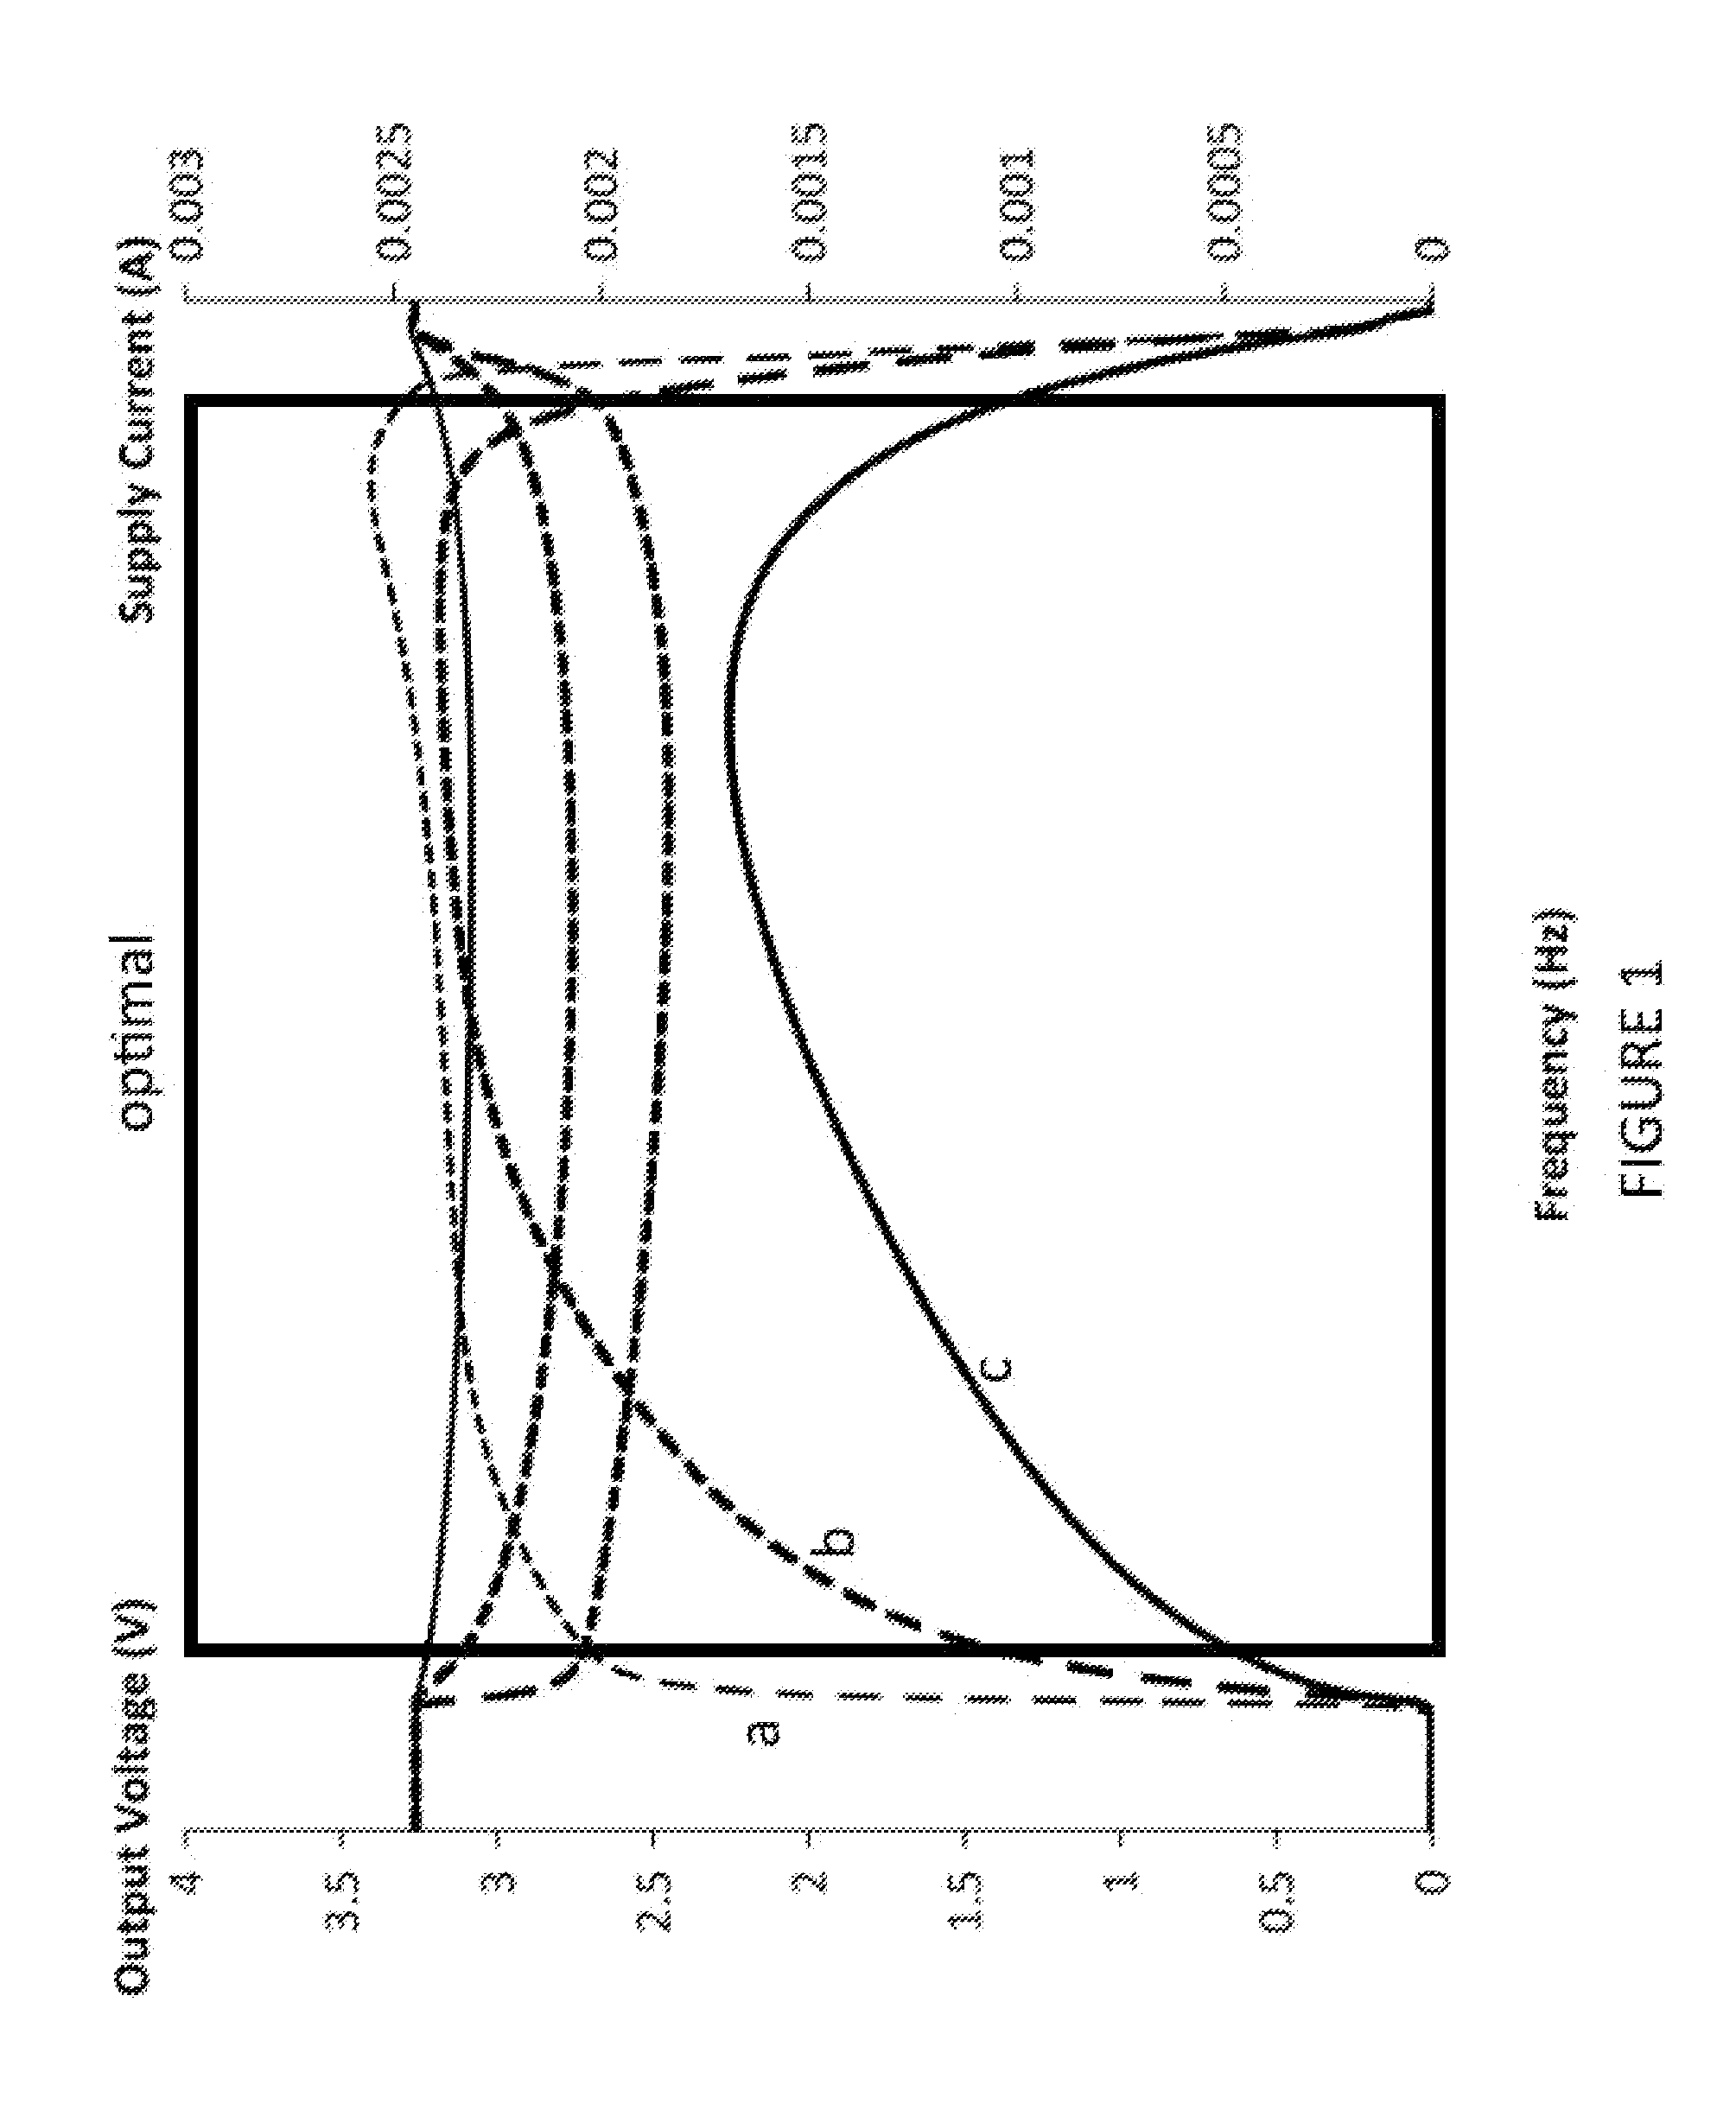 Wearable respiratory inductance plethysmography device and method for respiratory activity analysis